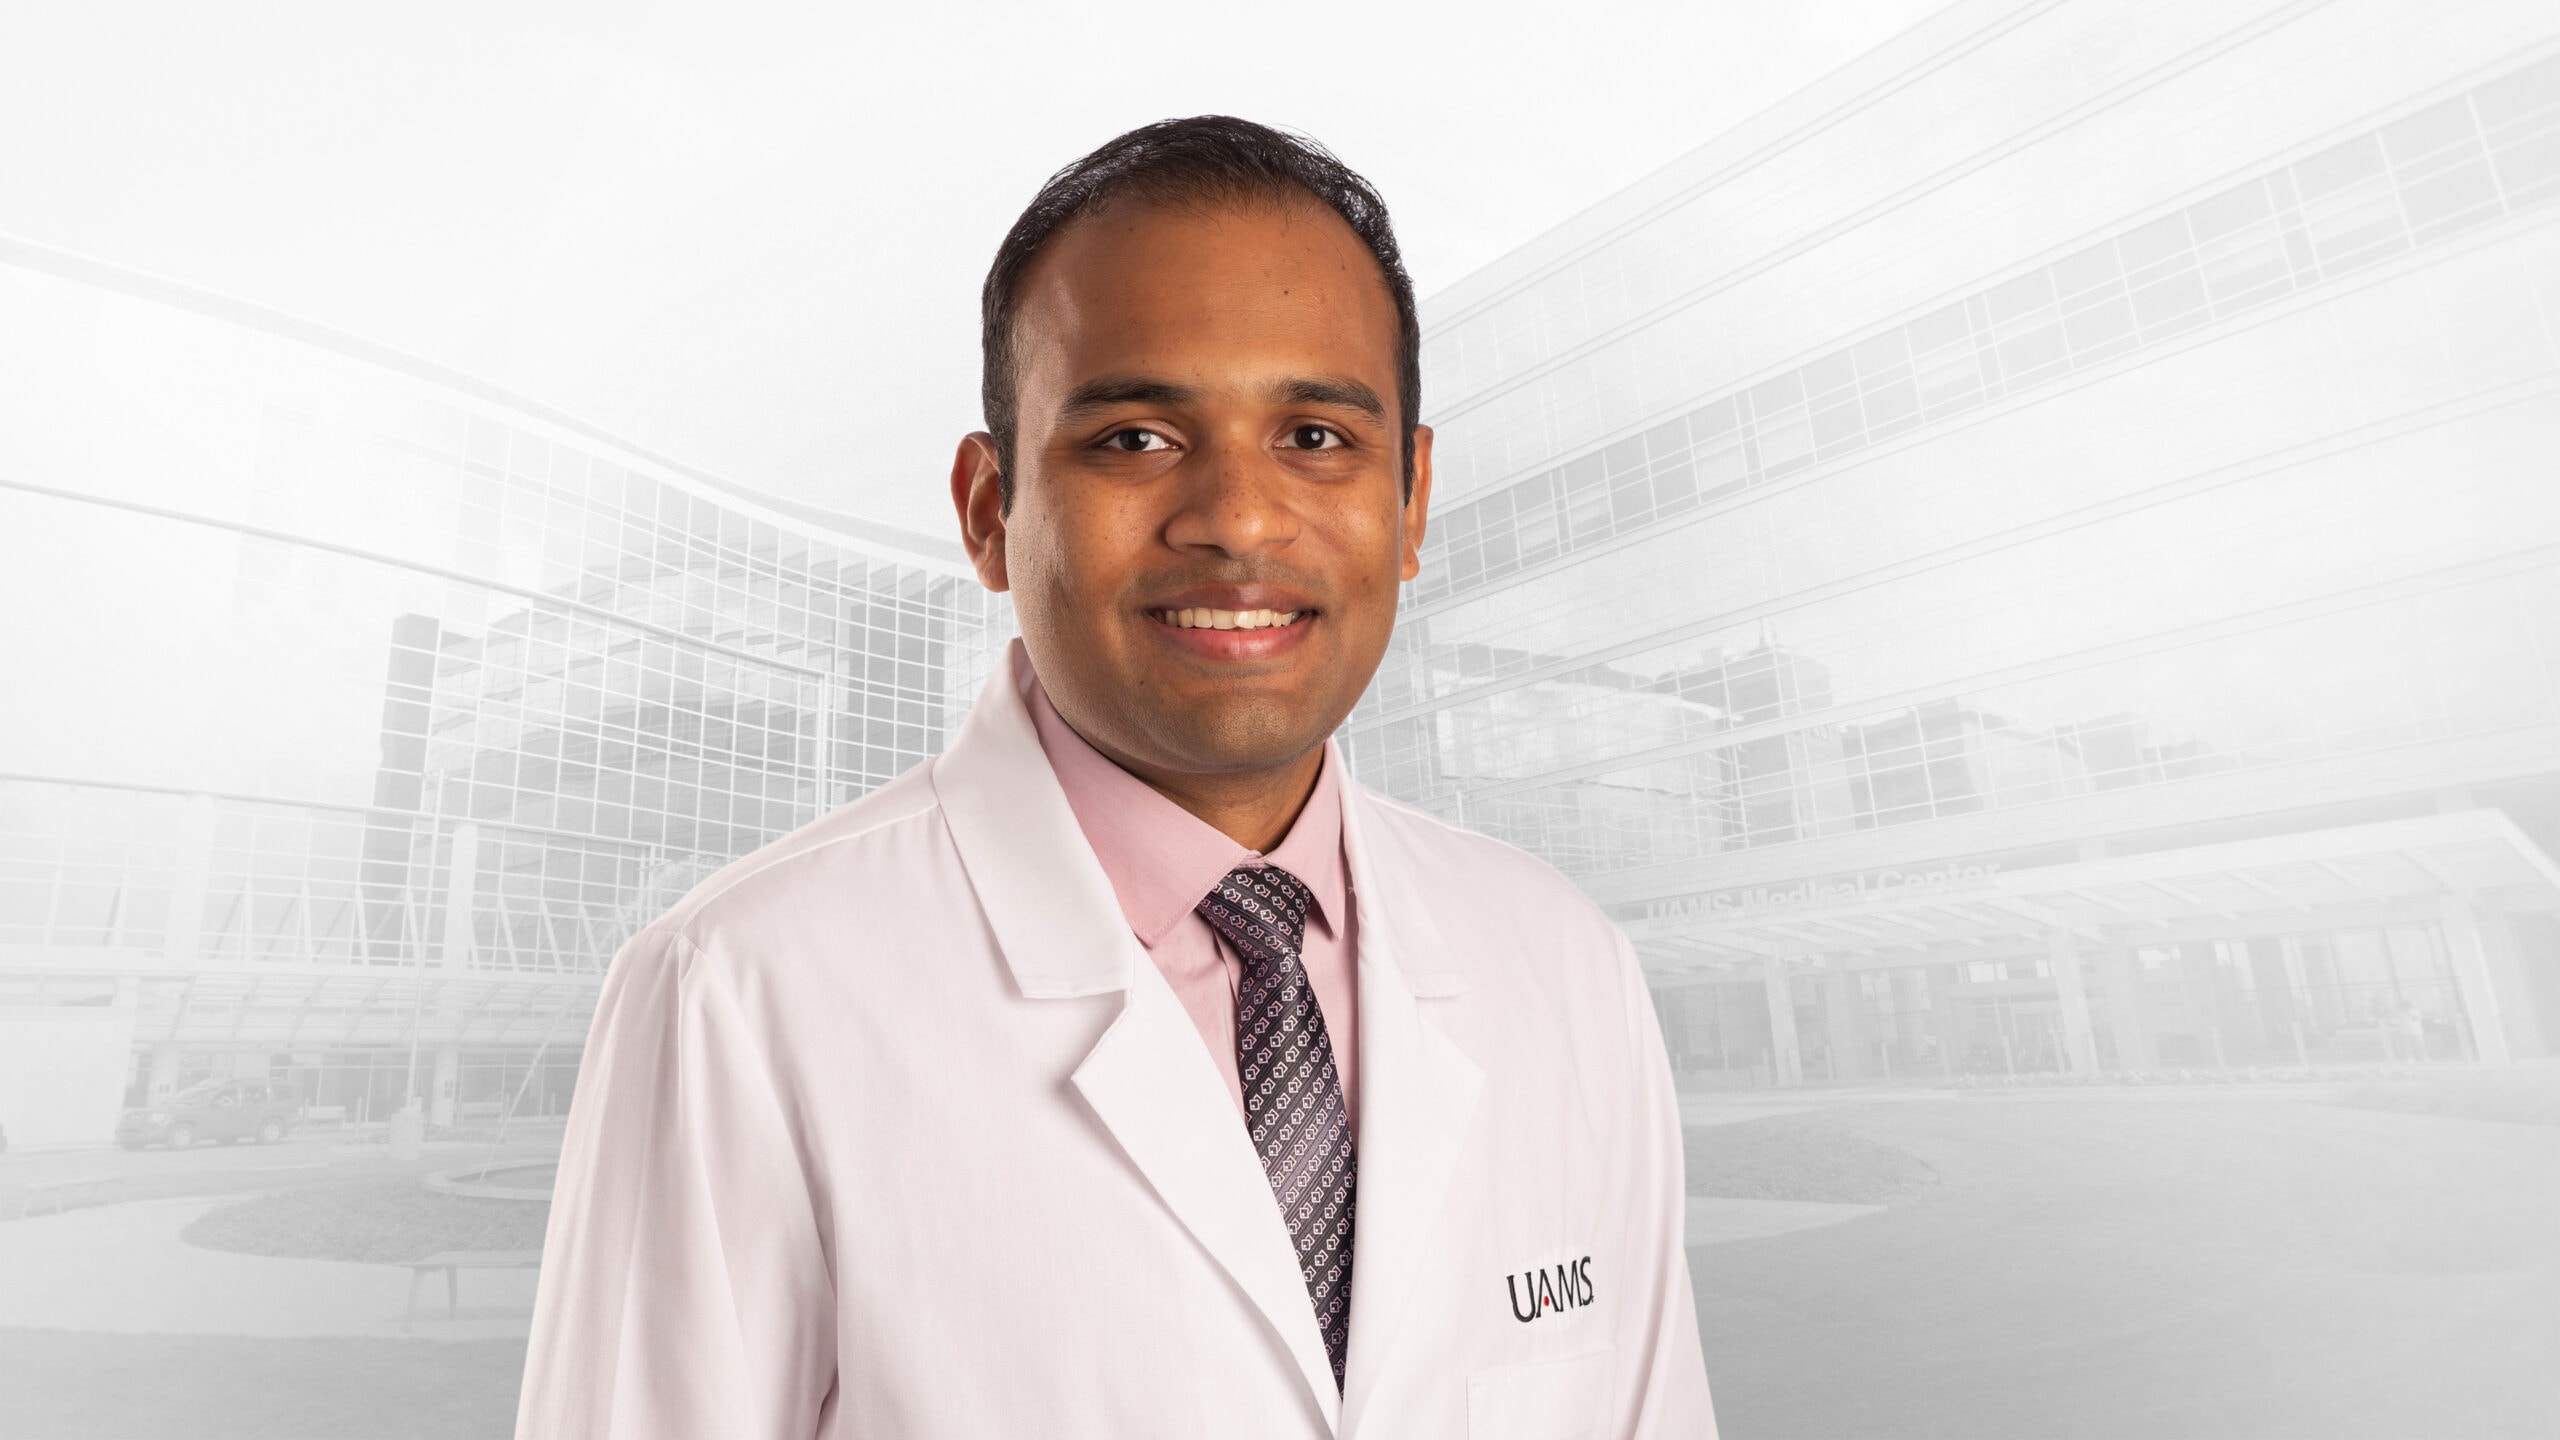 Dr. Sunny Singh is the director of the UAMS Baptist Health Cancer Center in North Little Rock, Arkansas